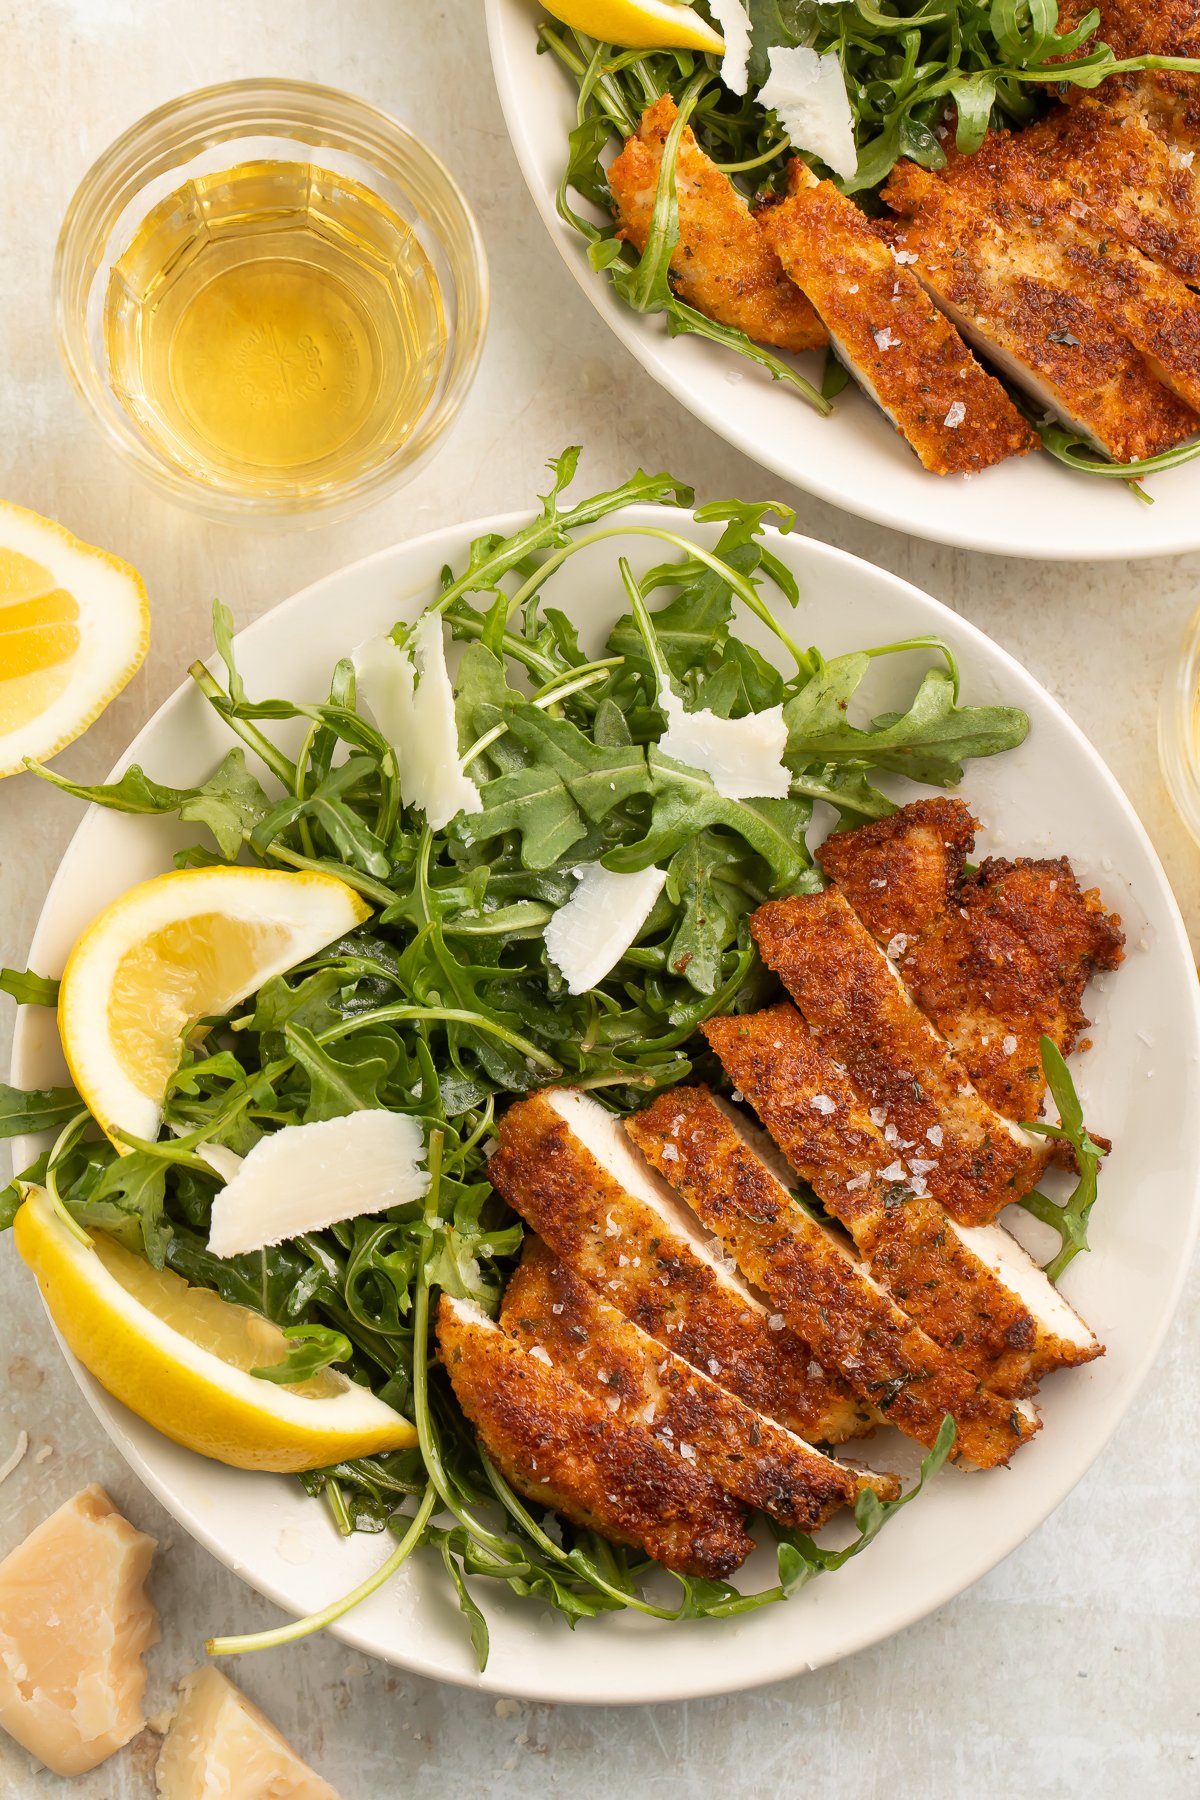 Top-down look at chicken milanese, sliced and served on a plate with a green arugula salad, lemon wedges, and parmesan slivers.